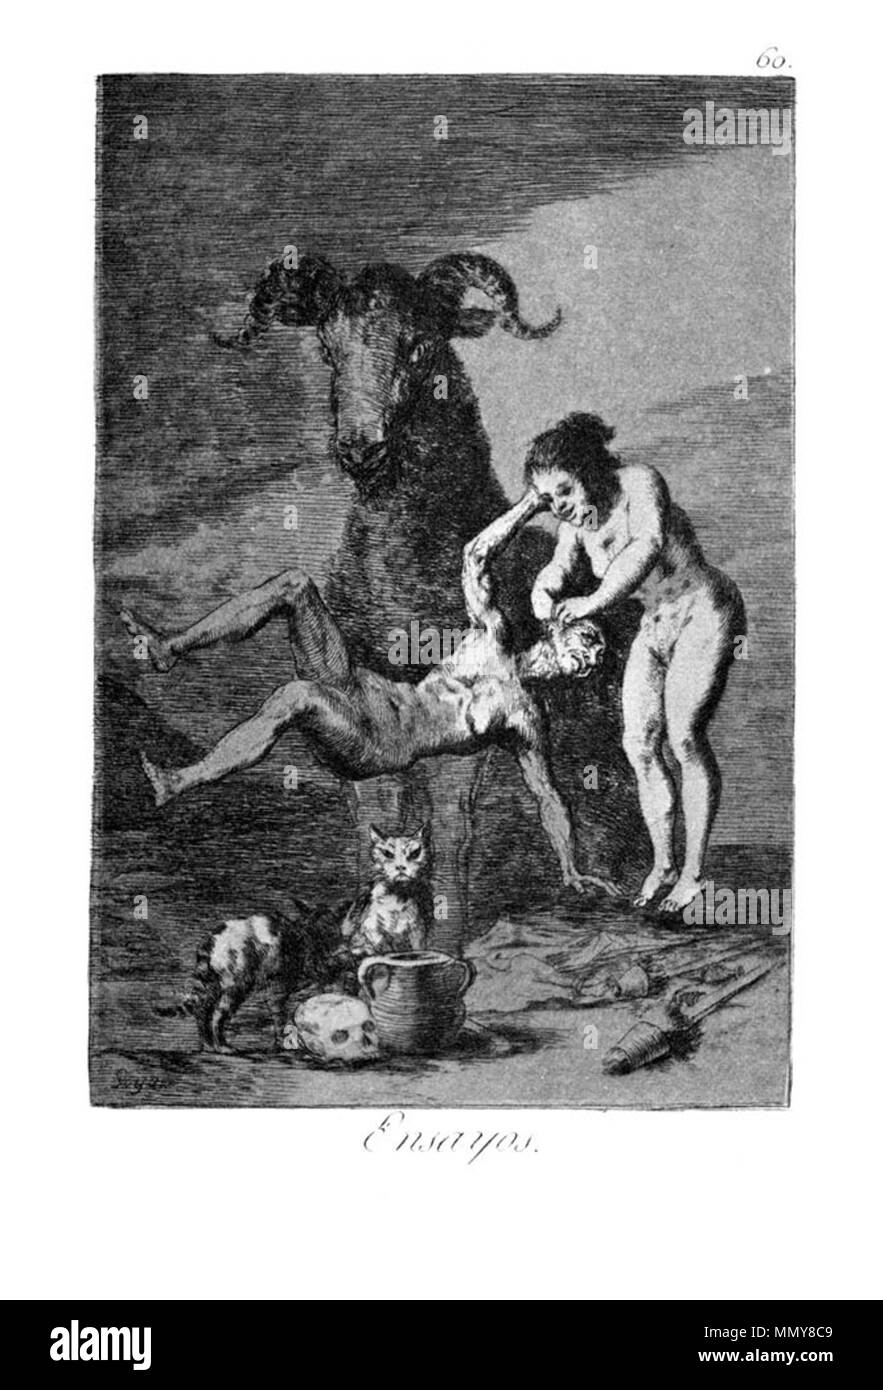 . Los Caprichos is a set of 80 aquatint prints created by Francisco Goya for release in 1799.  . 1799.   Francisco Goya  (1746–1828)      Alternative names Francisco Goya Lucientes, Francisco de Goya y Lucientes, Francisco José Goya Lucientes  Description Spanish painter, printmaker, lithographer, engraver and etcher  Date of birth/death 30 March 1746 16 April 1828  Location of birth/death Fuendetodos Bordeaux  Work location Madrid, Zaragoza, Bordeaux  Authority control  : Q5432 VIAF:?54343141 ISNI:?0000 0001 2280 1608 ULAN:?500118936 LCCN:?n79003363 NLA:?36545788 WorldCat Goya - Caprichos (60 Stock Photo